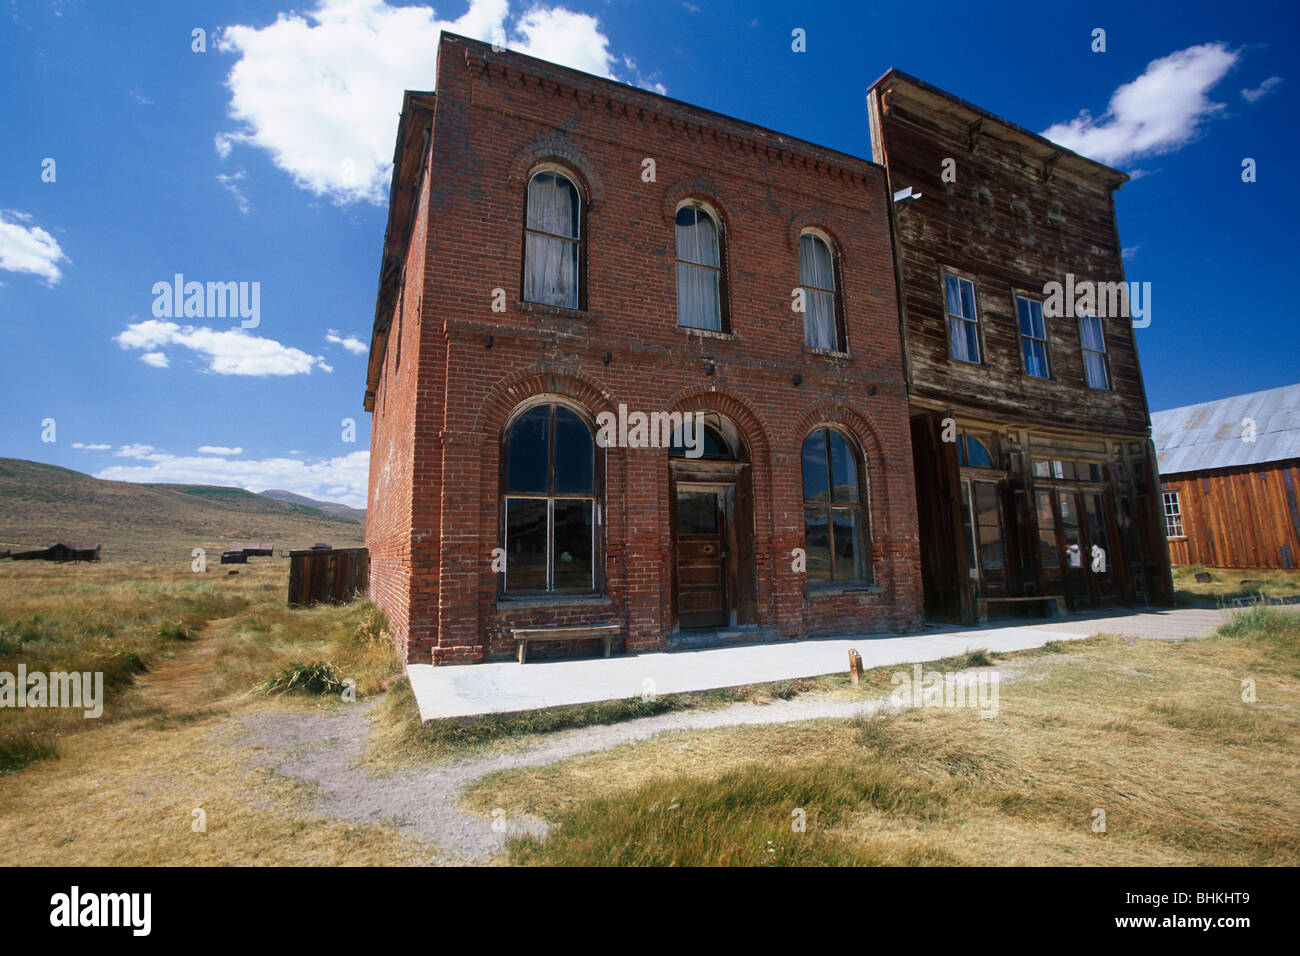 IOOF Hall, Dechambeau Hotel and Post Office, Bodie State Historic Park, California Stock Photo